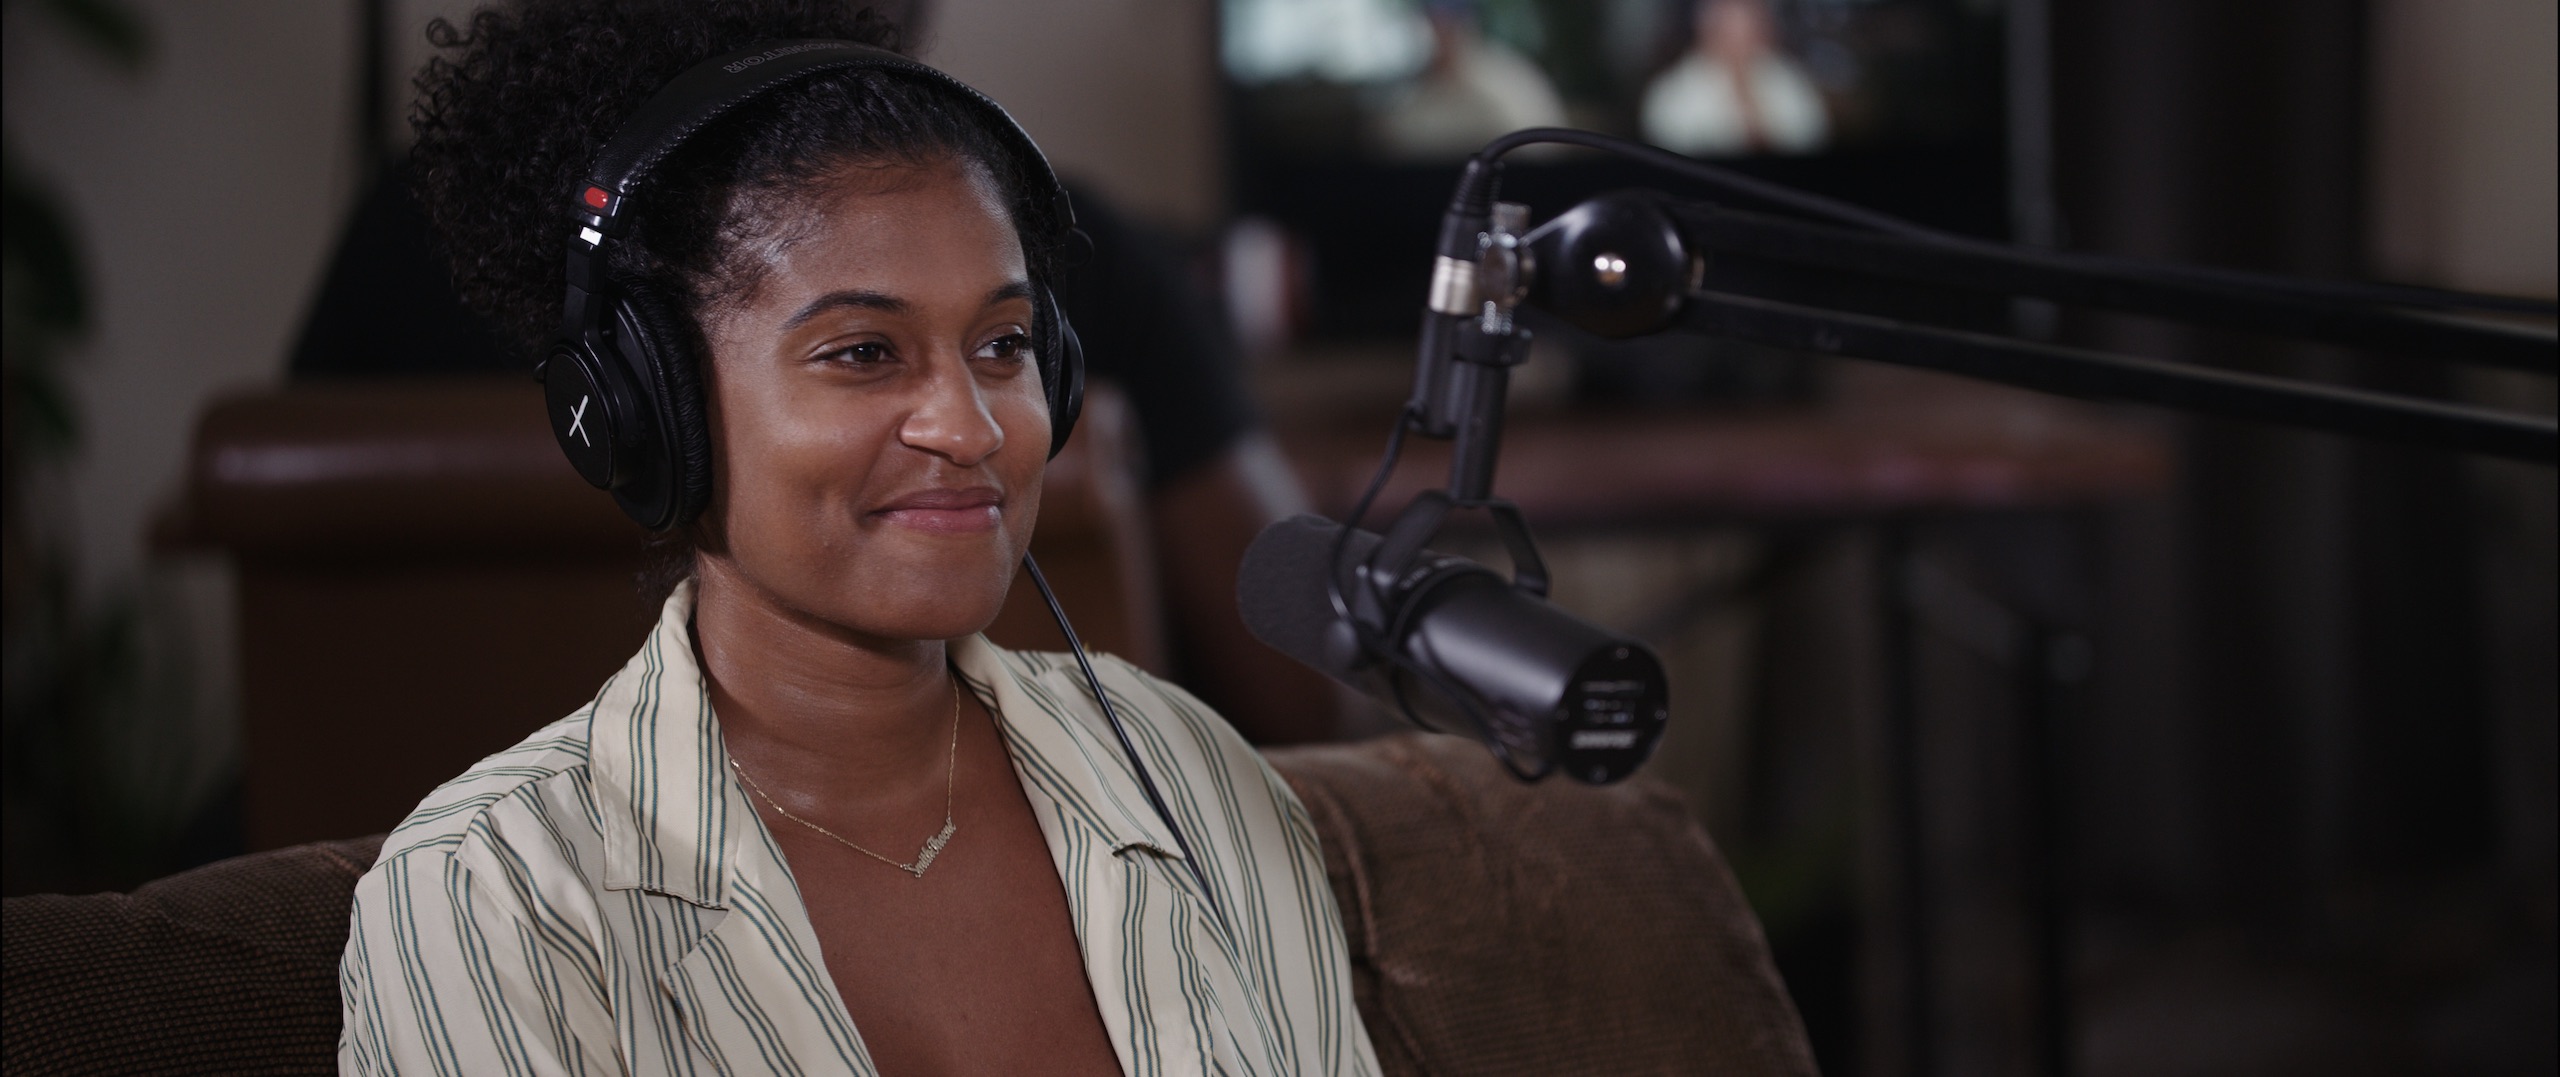 IU Uncreative Radio with Alexis Nichole Smith smiling by a microphone wearing headphones